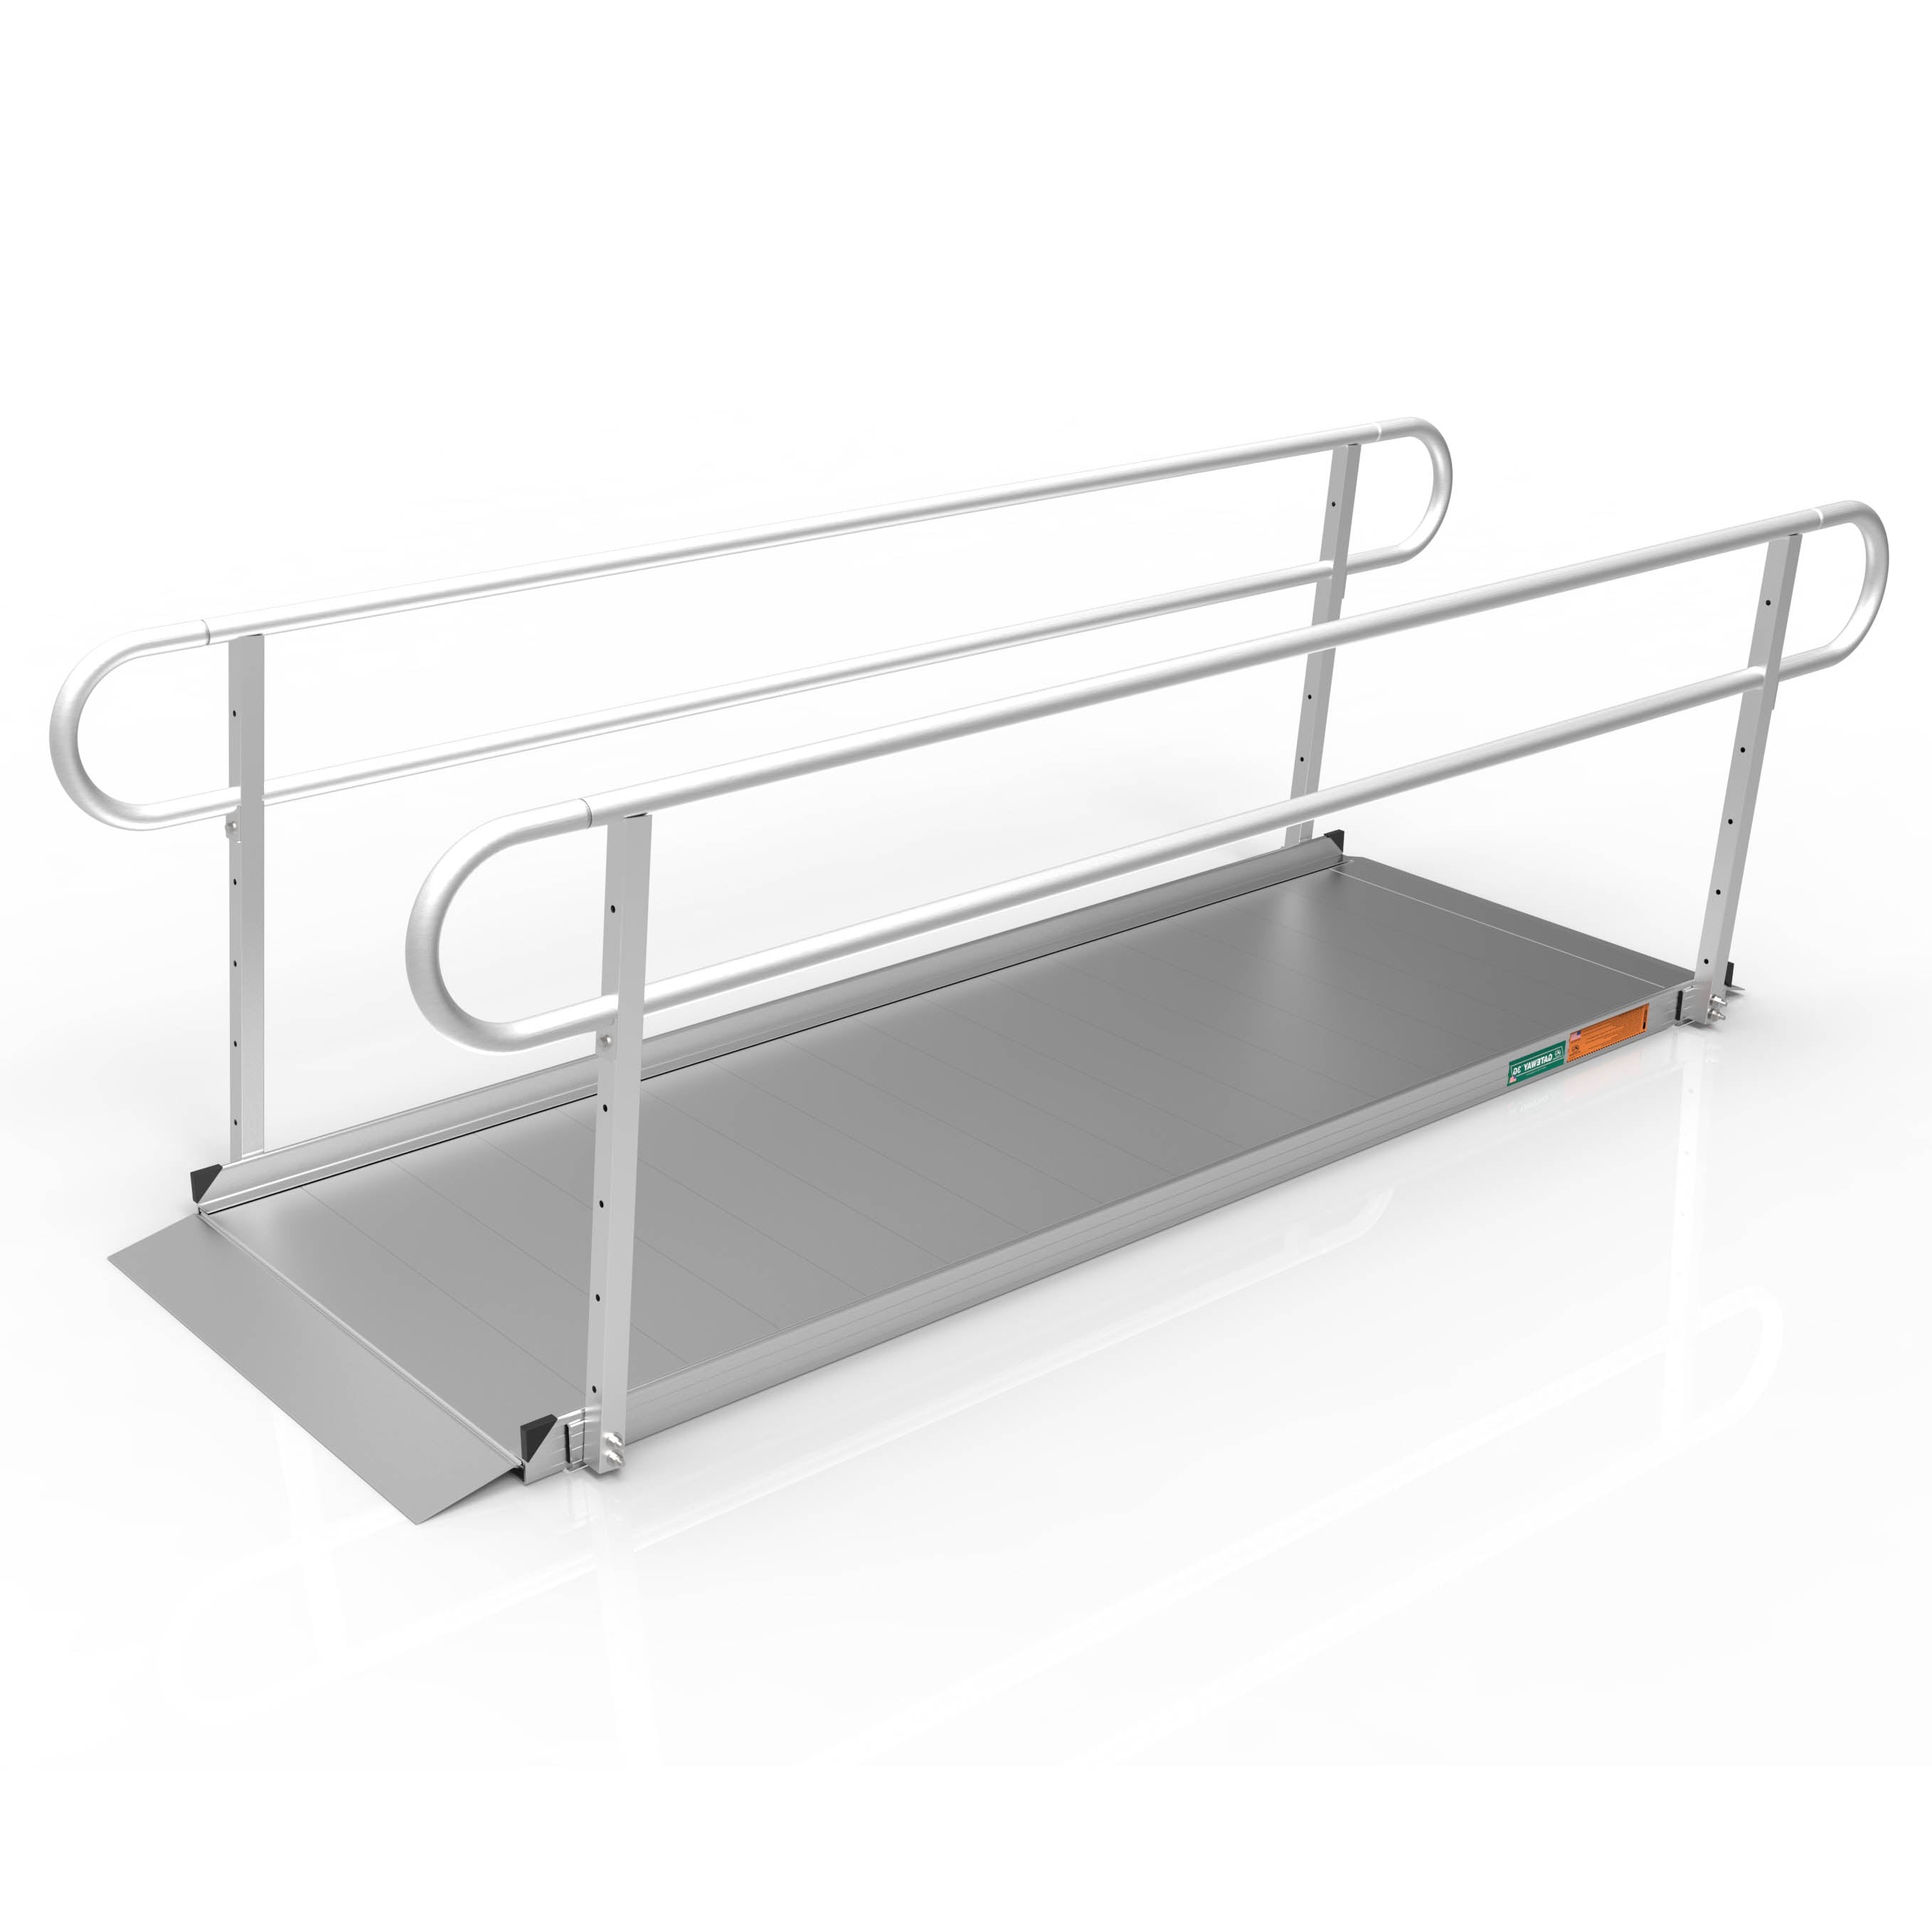 EZ-ACCESS® GATEWAY™ 3G Solid Surface Portable Ramp (Two-Line Handrails) 9 Foot